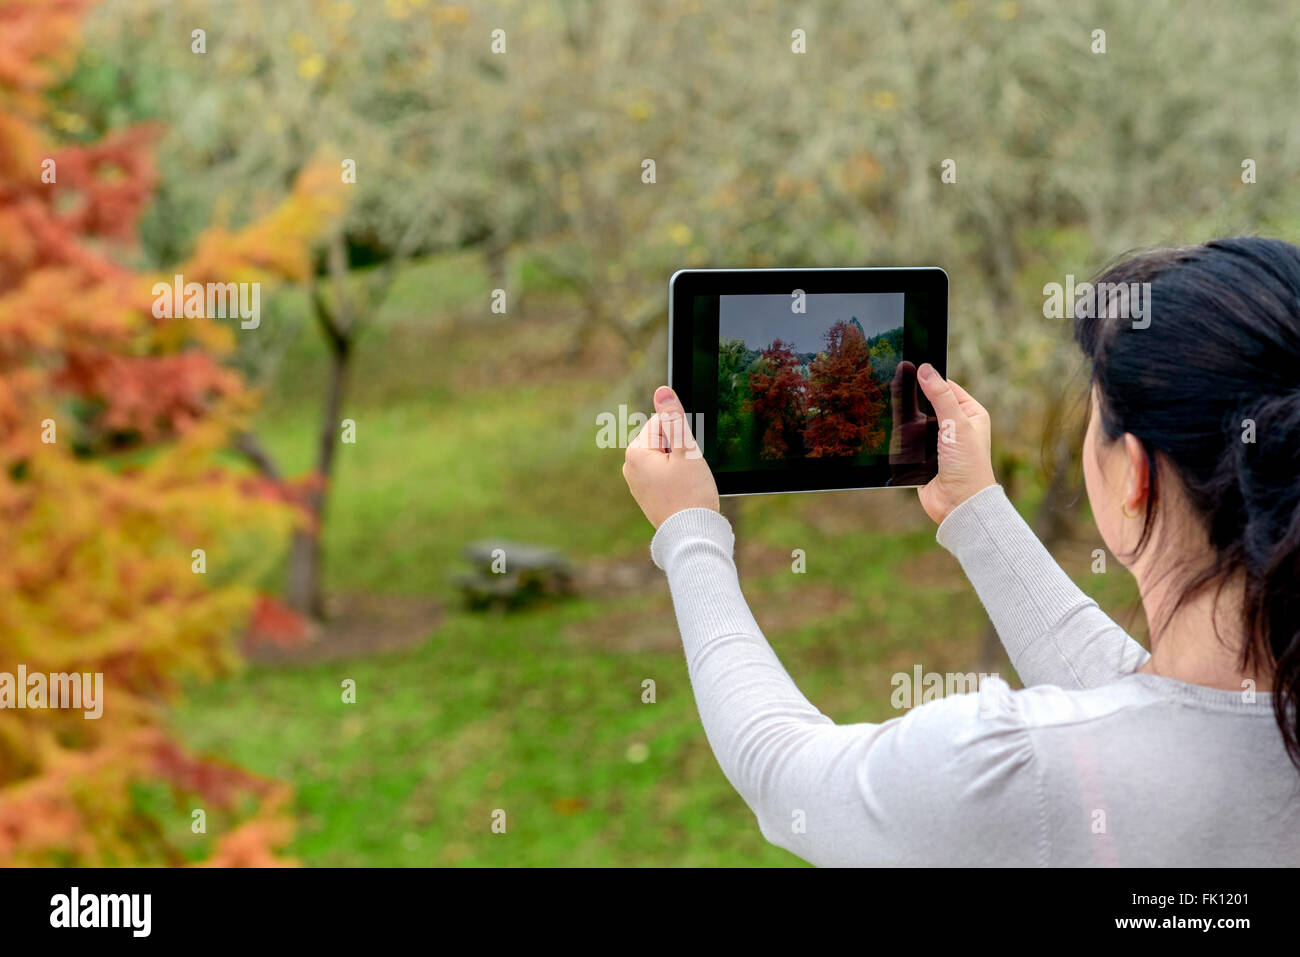 Woman taking pictures with tablet in autumn park Stock Photo